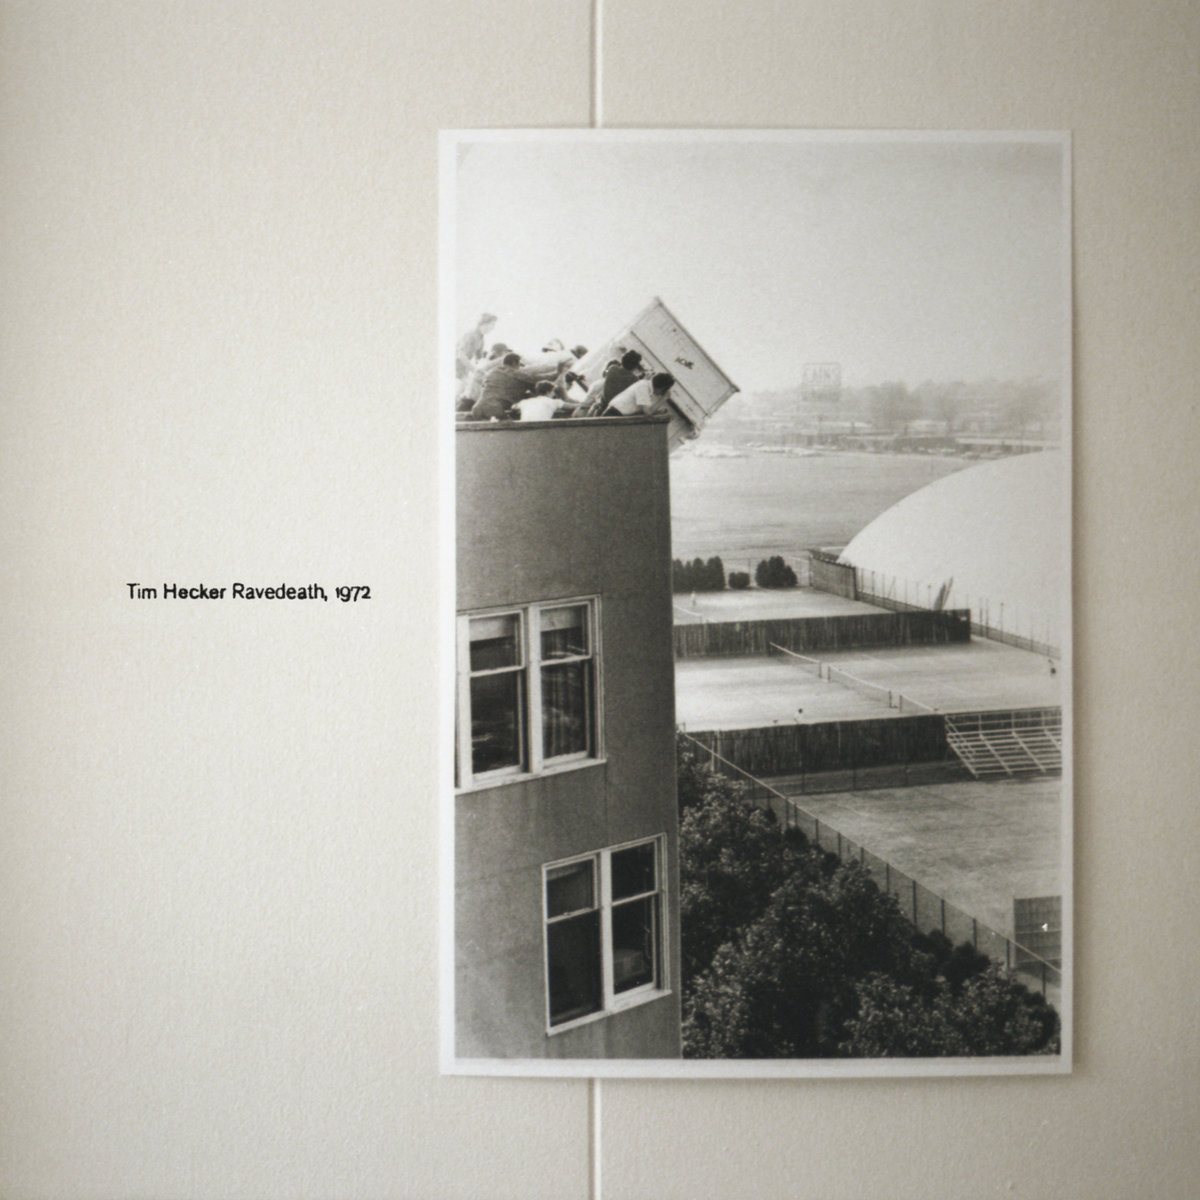 Today's work soundtrack: Tim Hecker - The Ravedeath 1972 Distorted, dark, intense, haunting, soul crushingly beautiful ambient drone sounds.Favorite track: In the Air II https://timhecker.bandcamp.com/album/ravedeath-1972